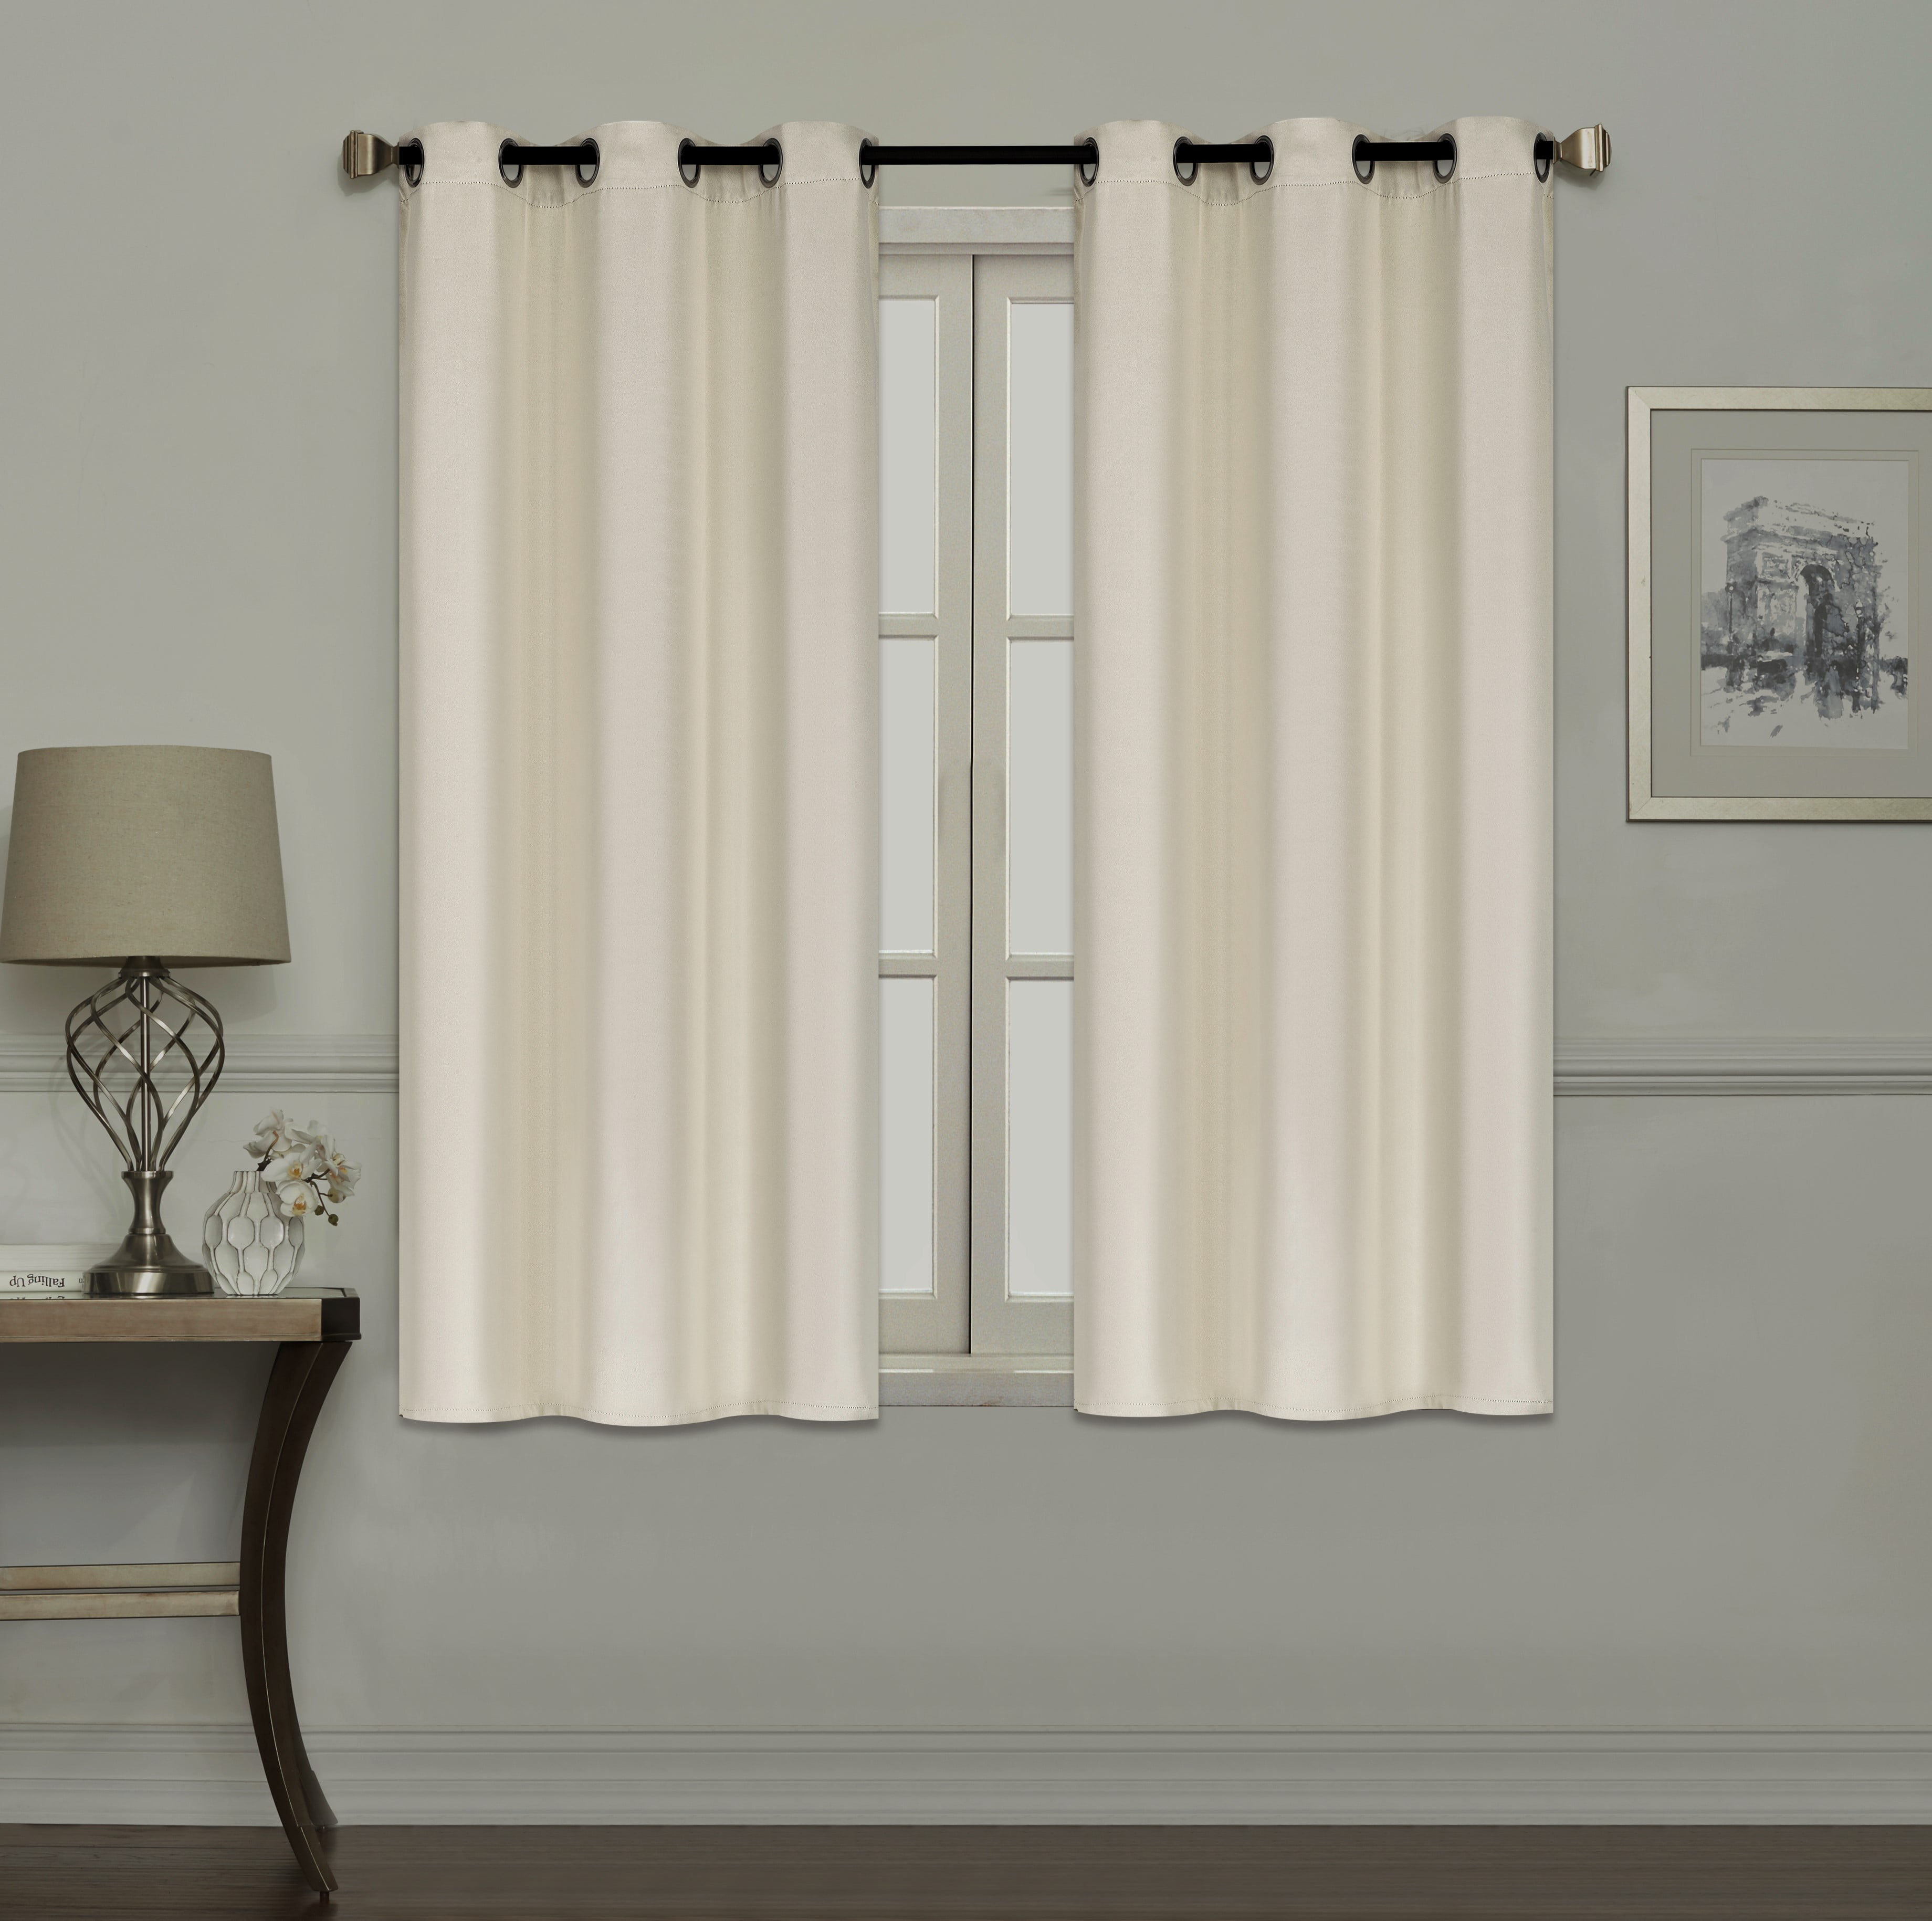 2 Panels, 40"x63" Thermal Insulated Grommet Blackout Curtain for Bedroom 